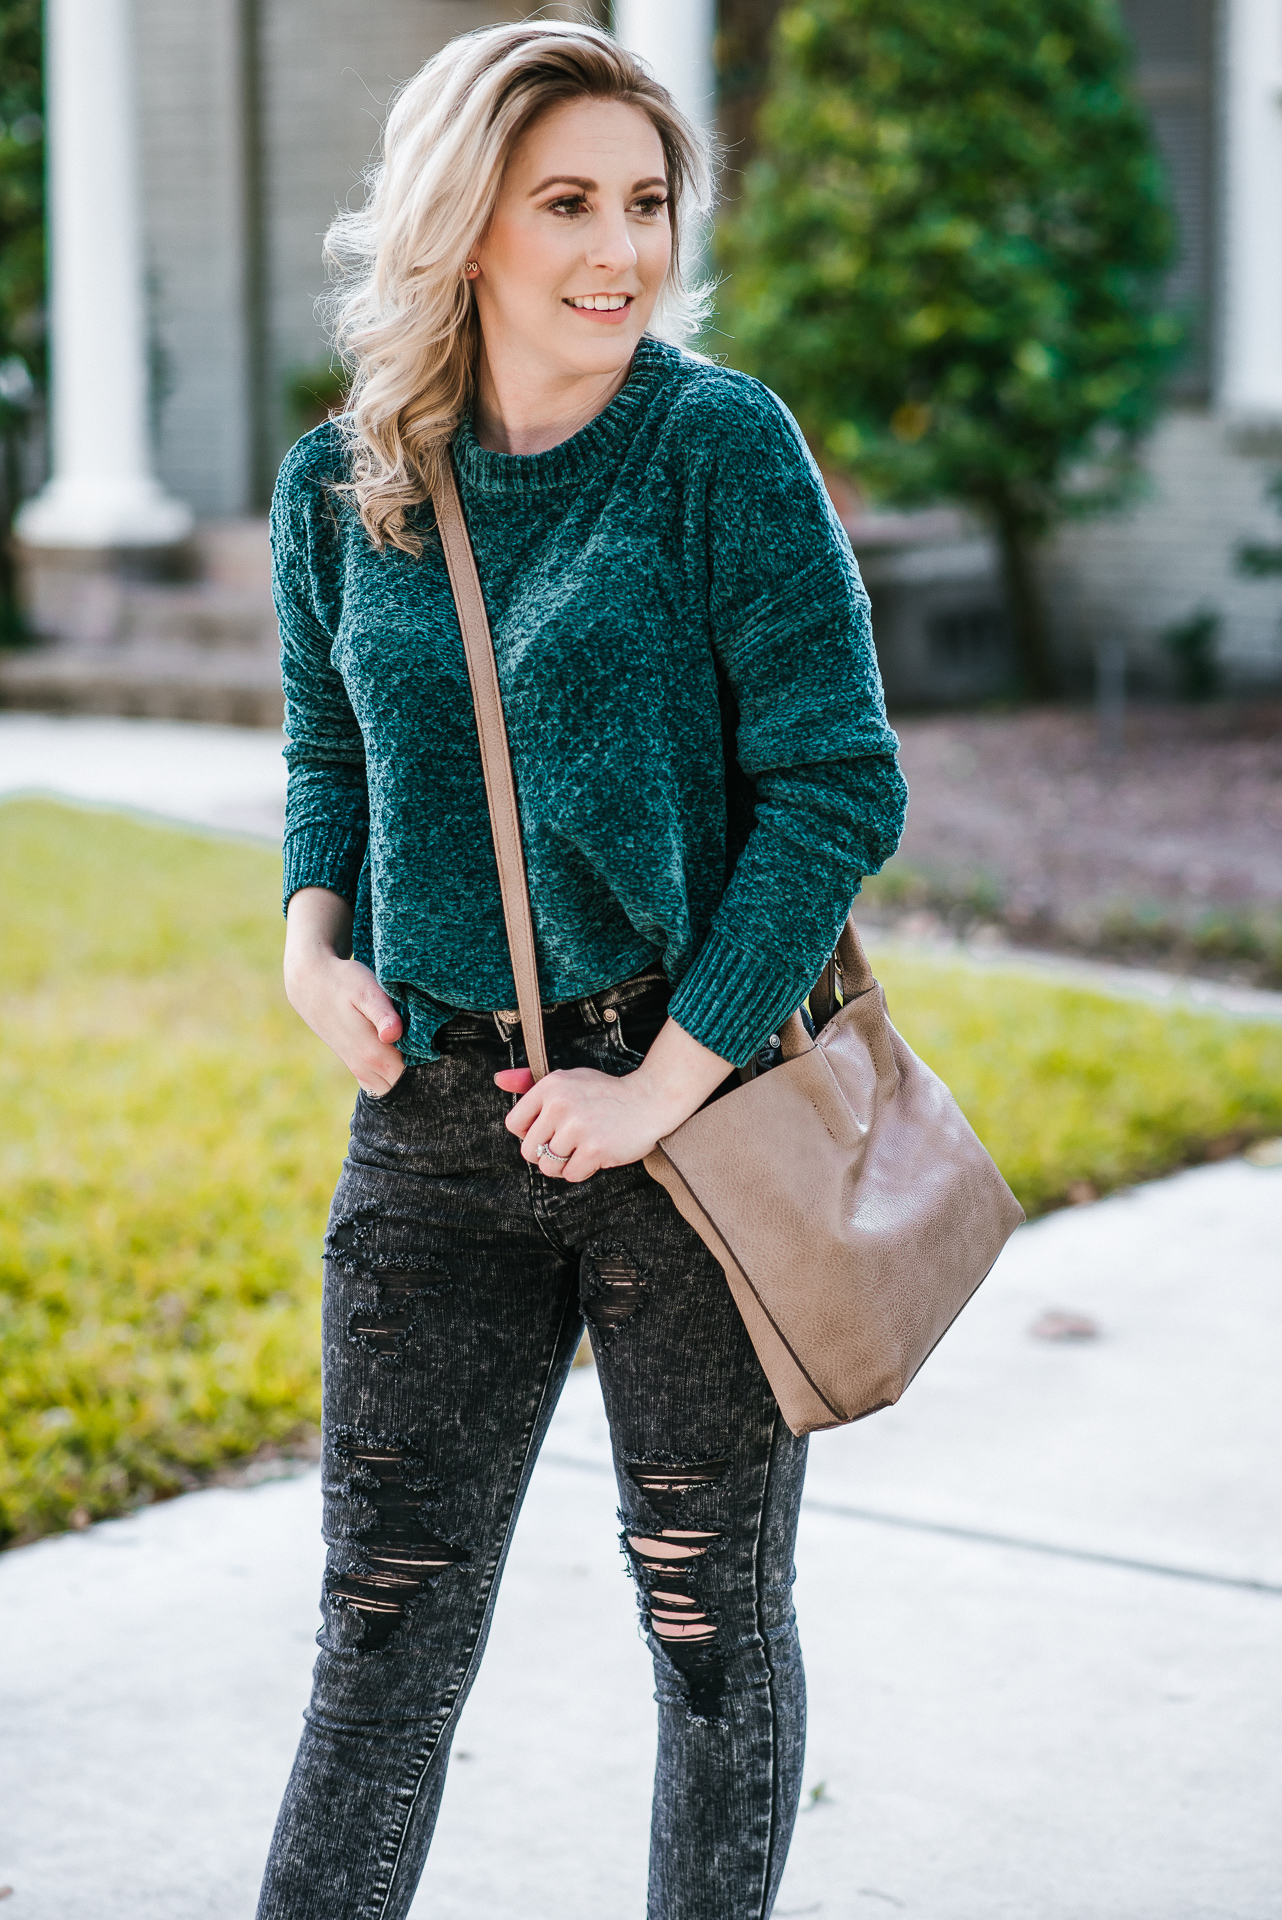 A Unicorn of a Different Color & My Favorite Chenille Sweater by Houston fashion blogger Gracefully Sassy